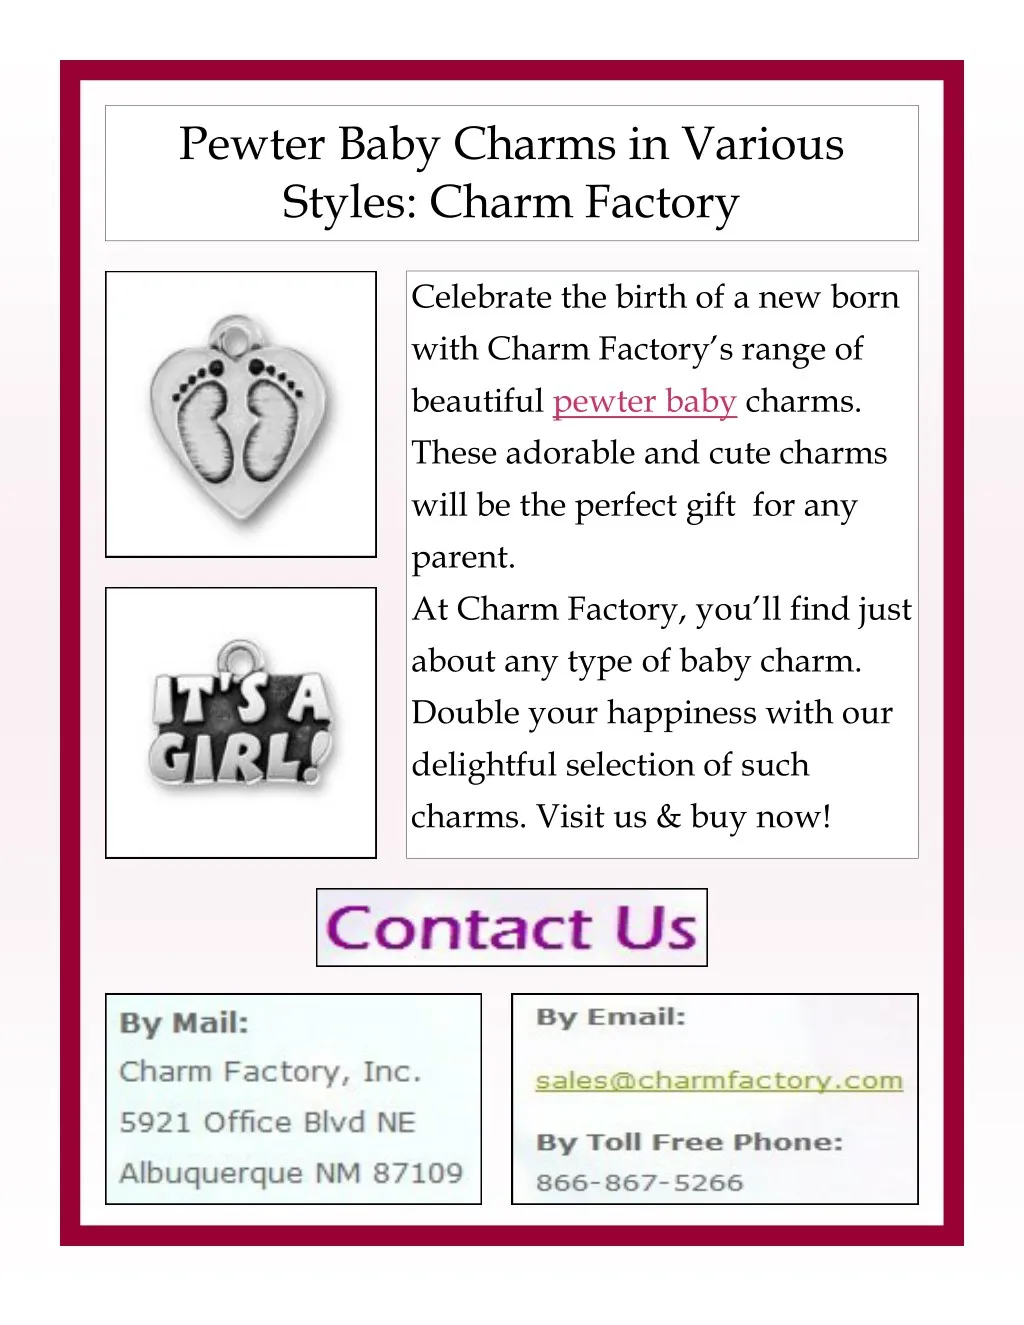 pewter baby charms in various styles charm factory